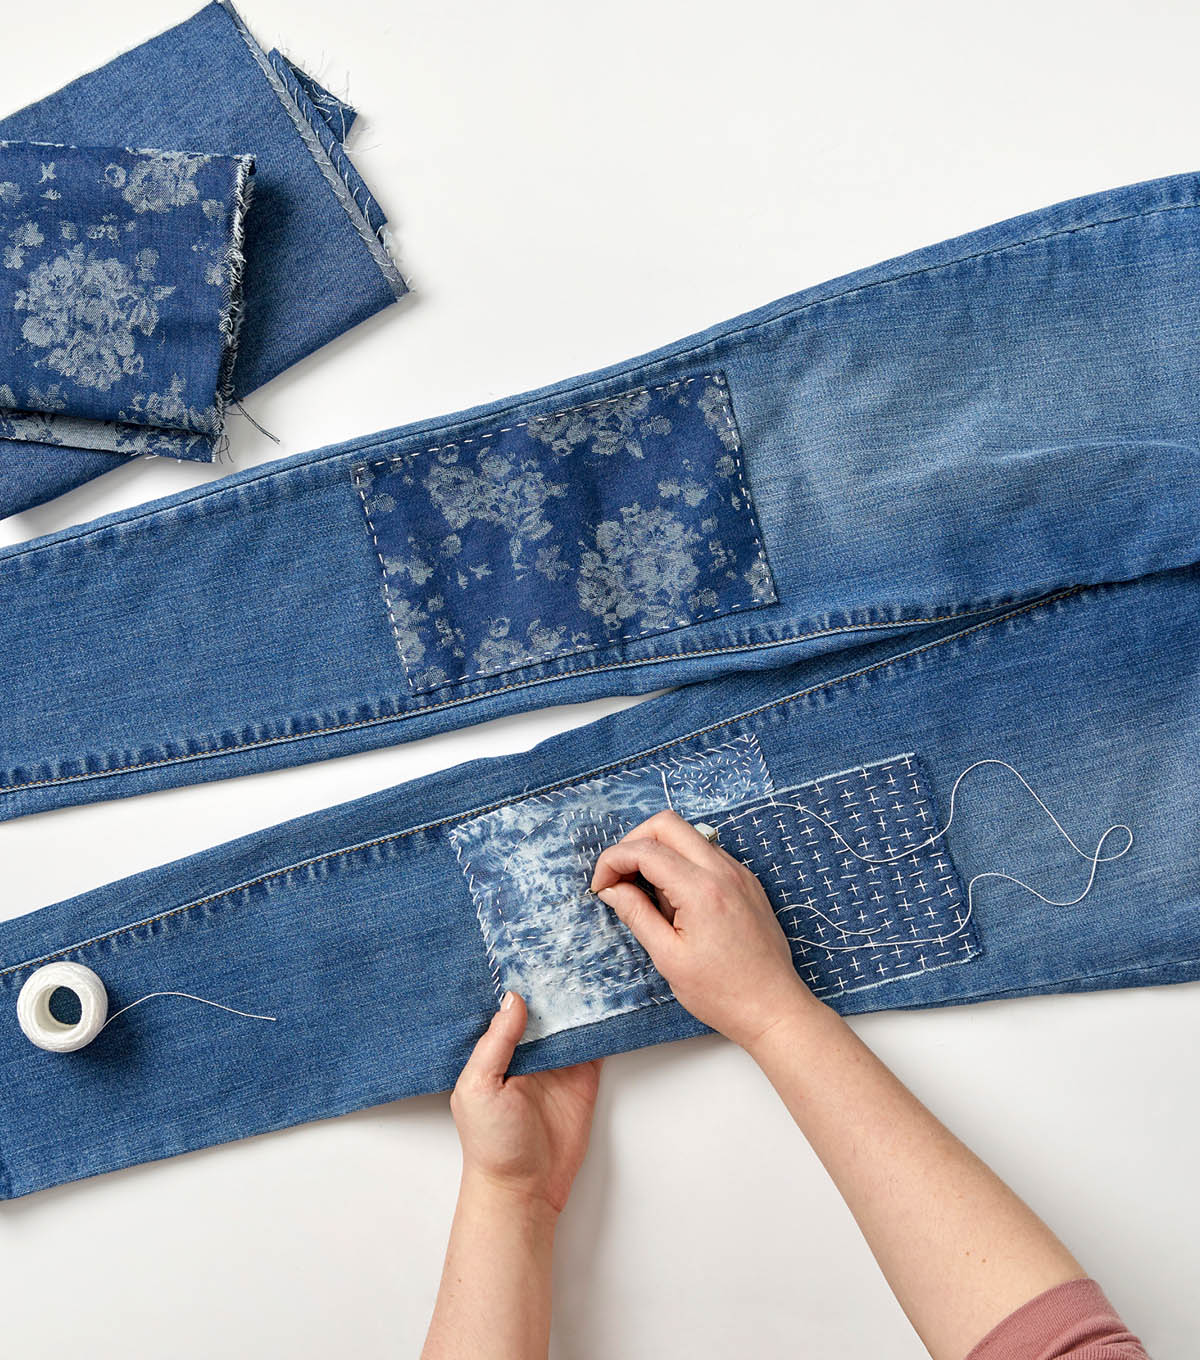 How To Make Jeans with Visible Mending | JOANN